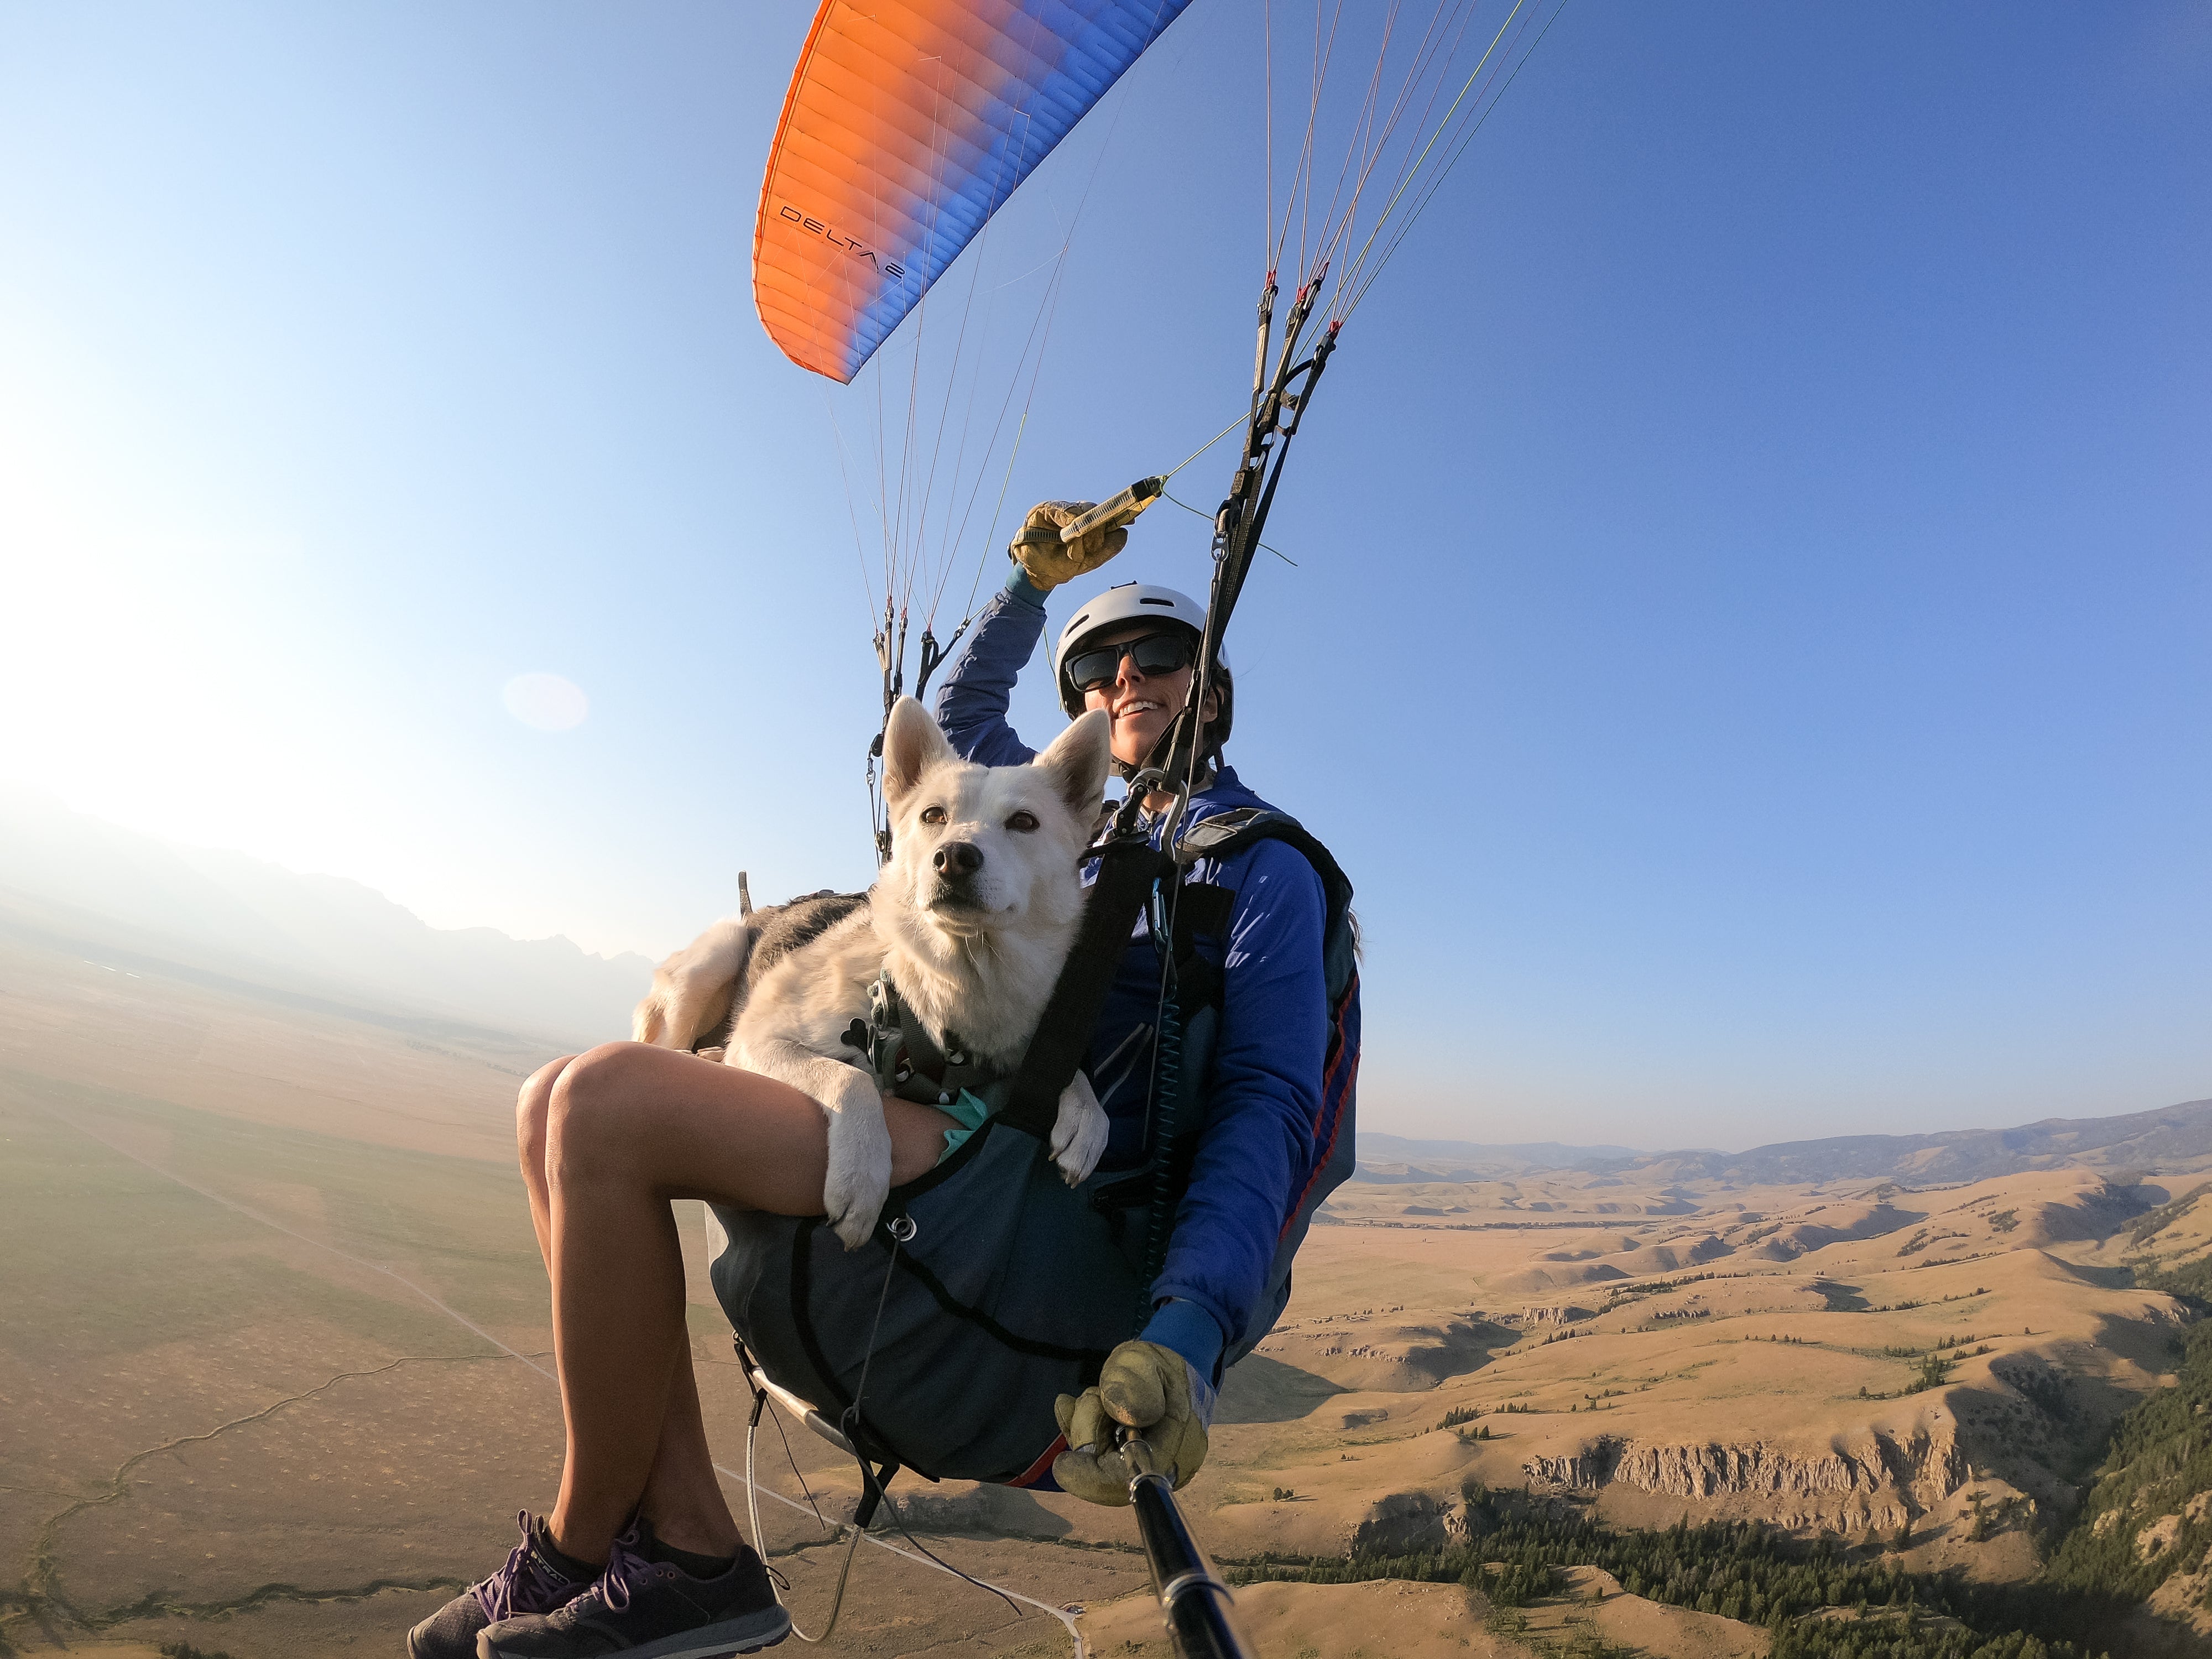 Becca paraglides with her dog Tala.